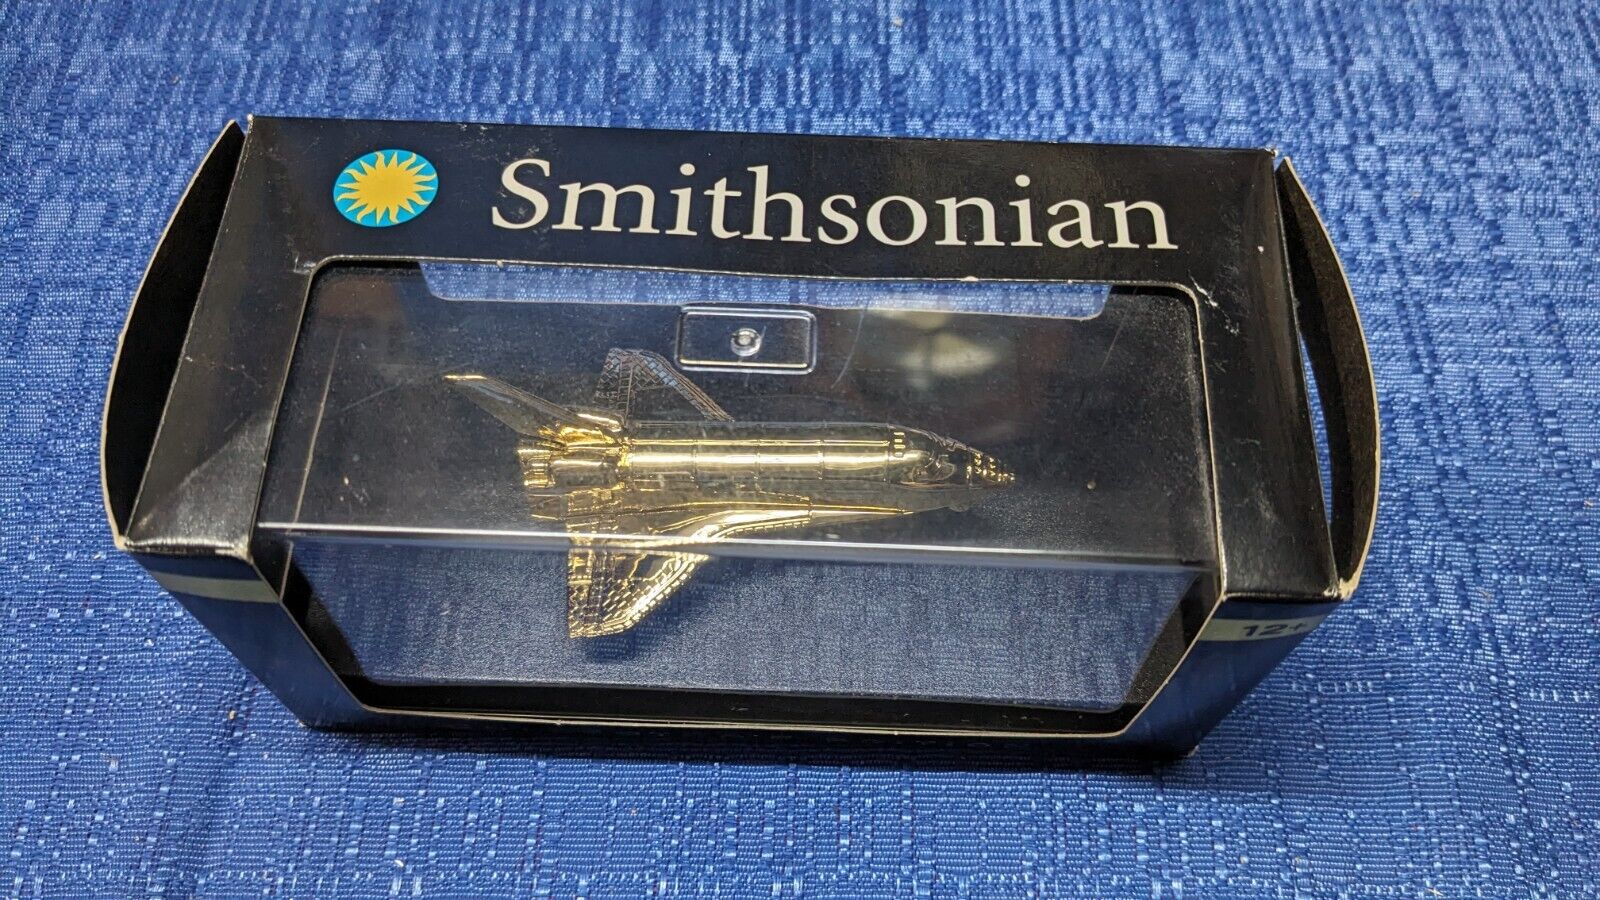 Smithsonian Space Shuttle Orbiter model 24 karat gold plated New With brochure